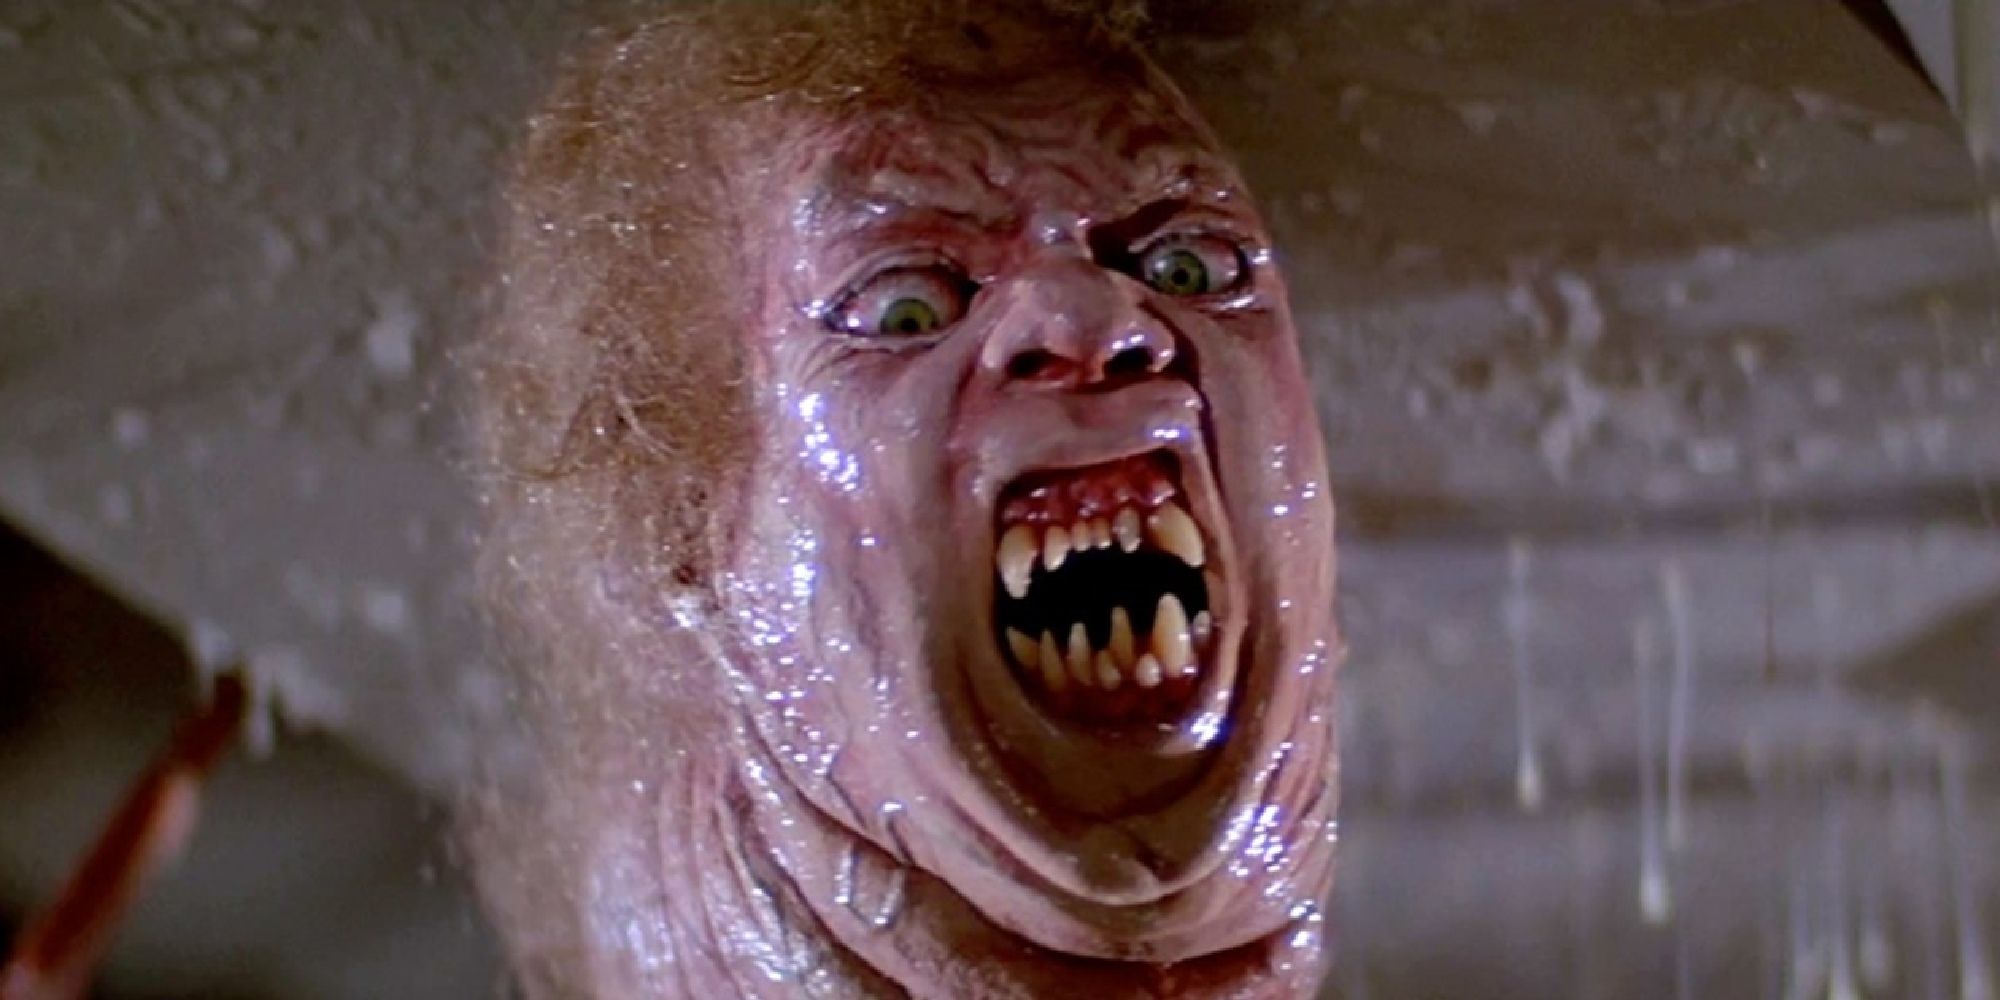 The creature in 'The Thing', appearing as a deformed human head